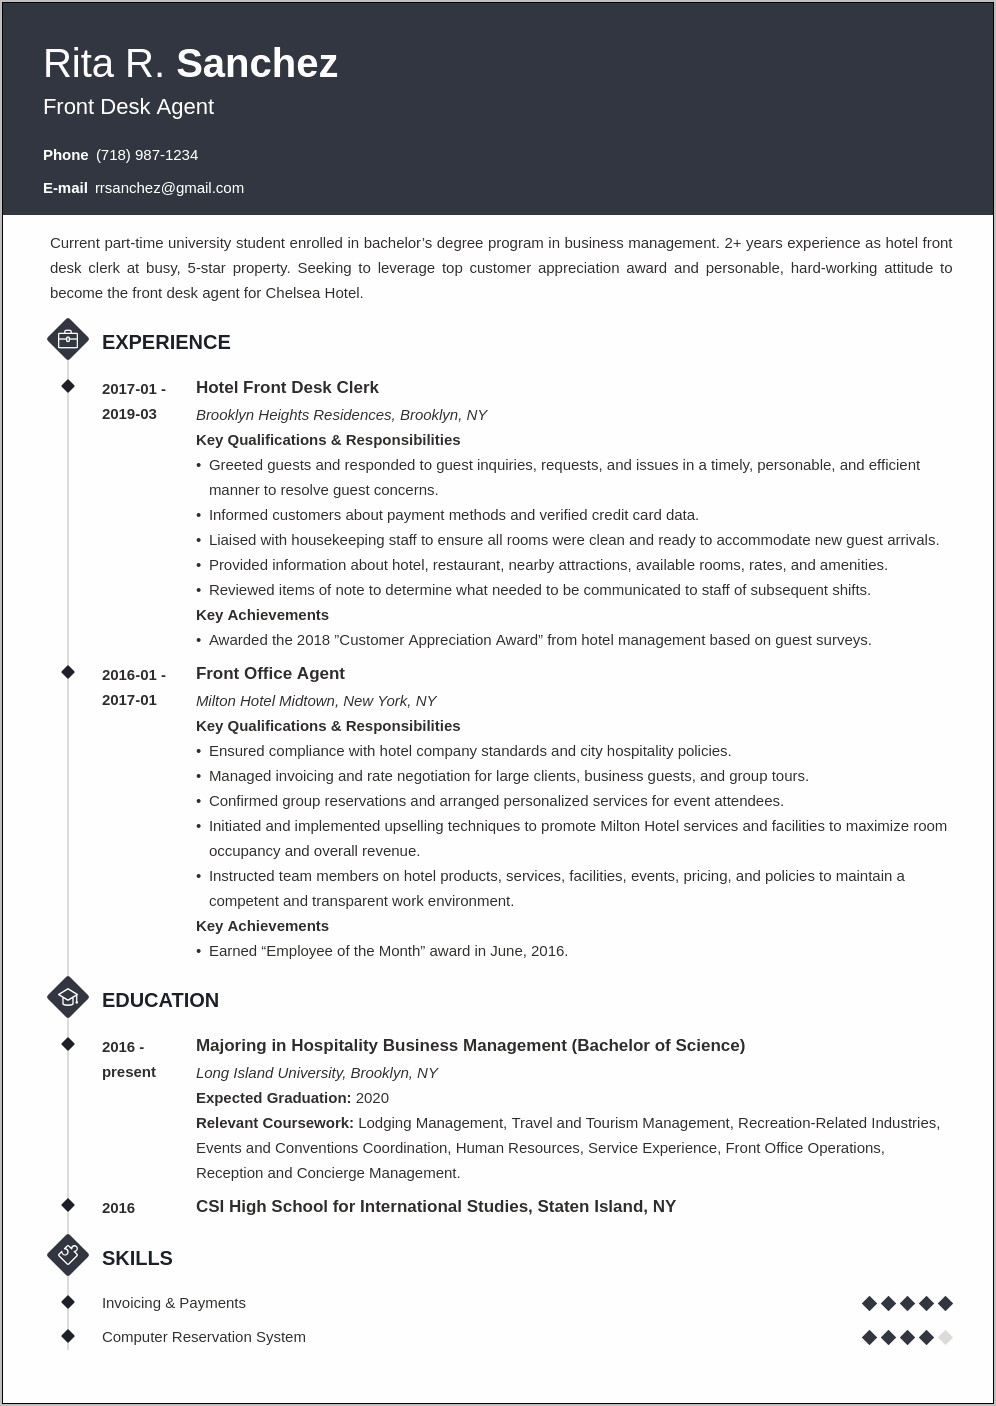 Resume Objective For Reception Job